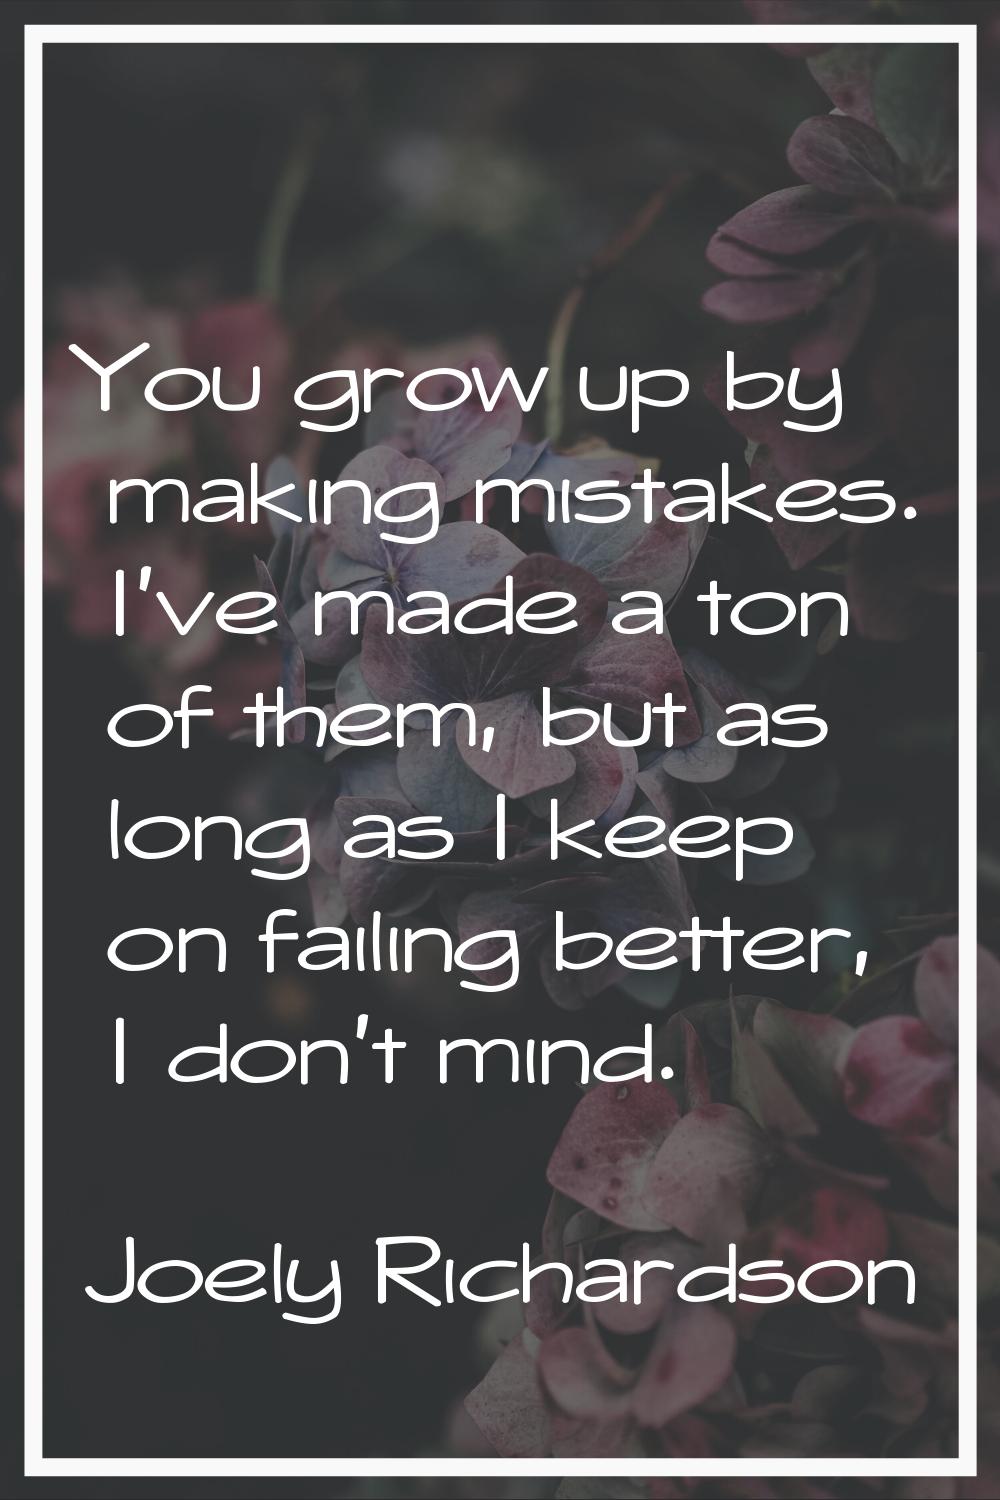 You grow up by making mistakes. I've made a ton of them, but as long as I keep on failing better, I